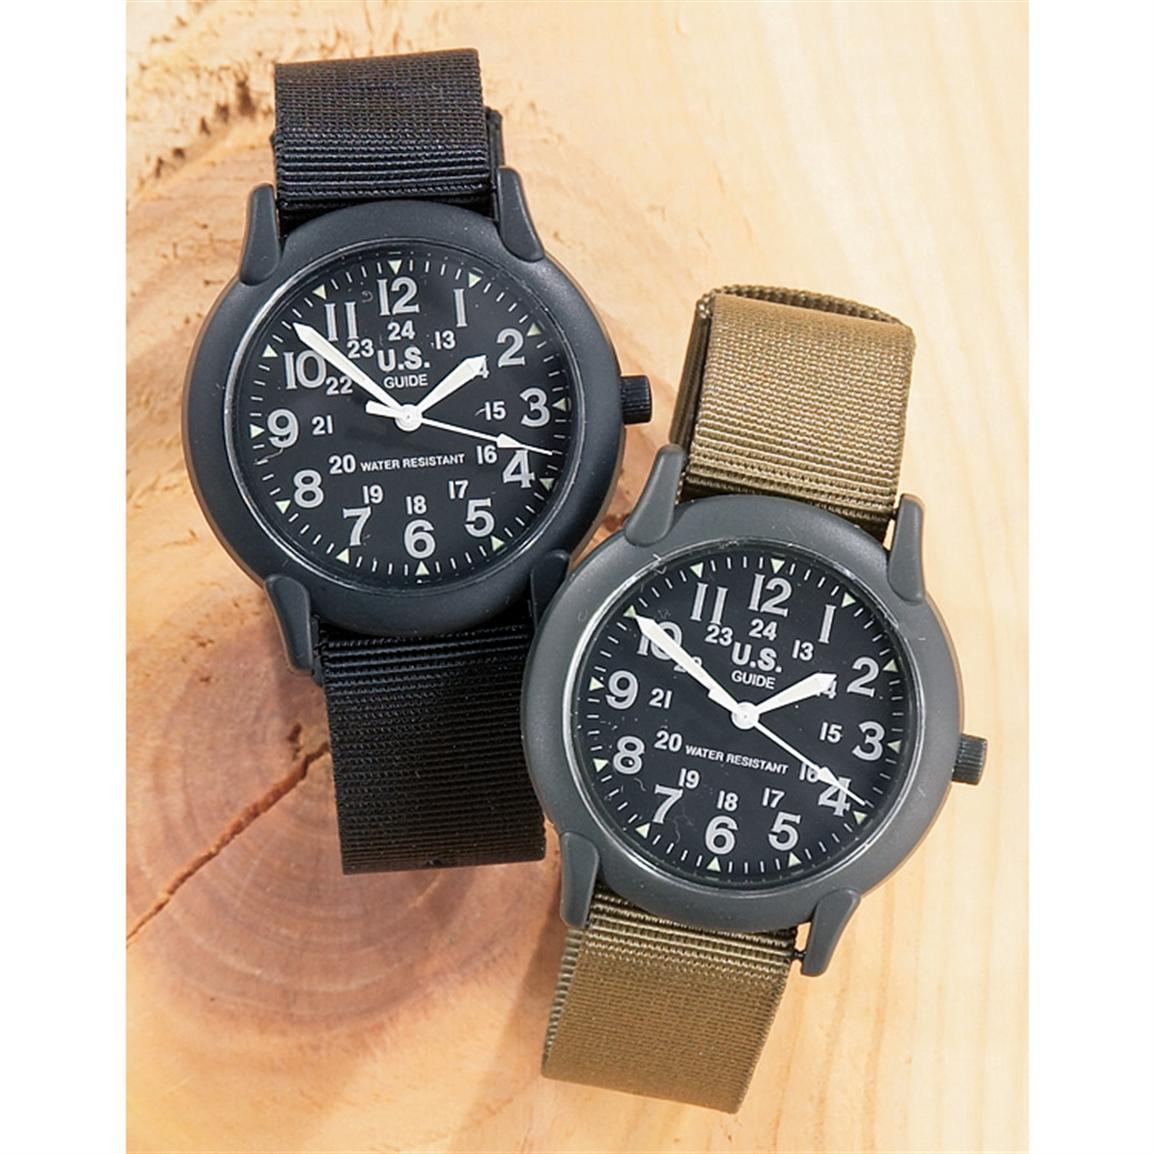 US Army Watches: The Ultimate Guide for Military Timepieces - News Military